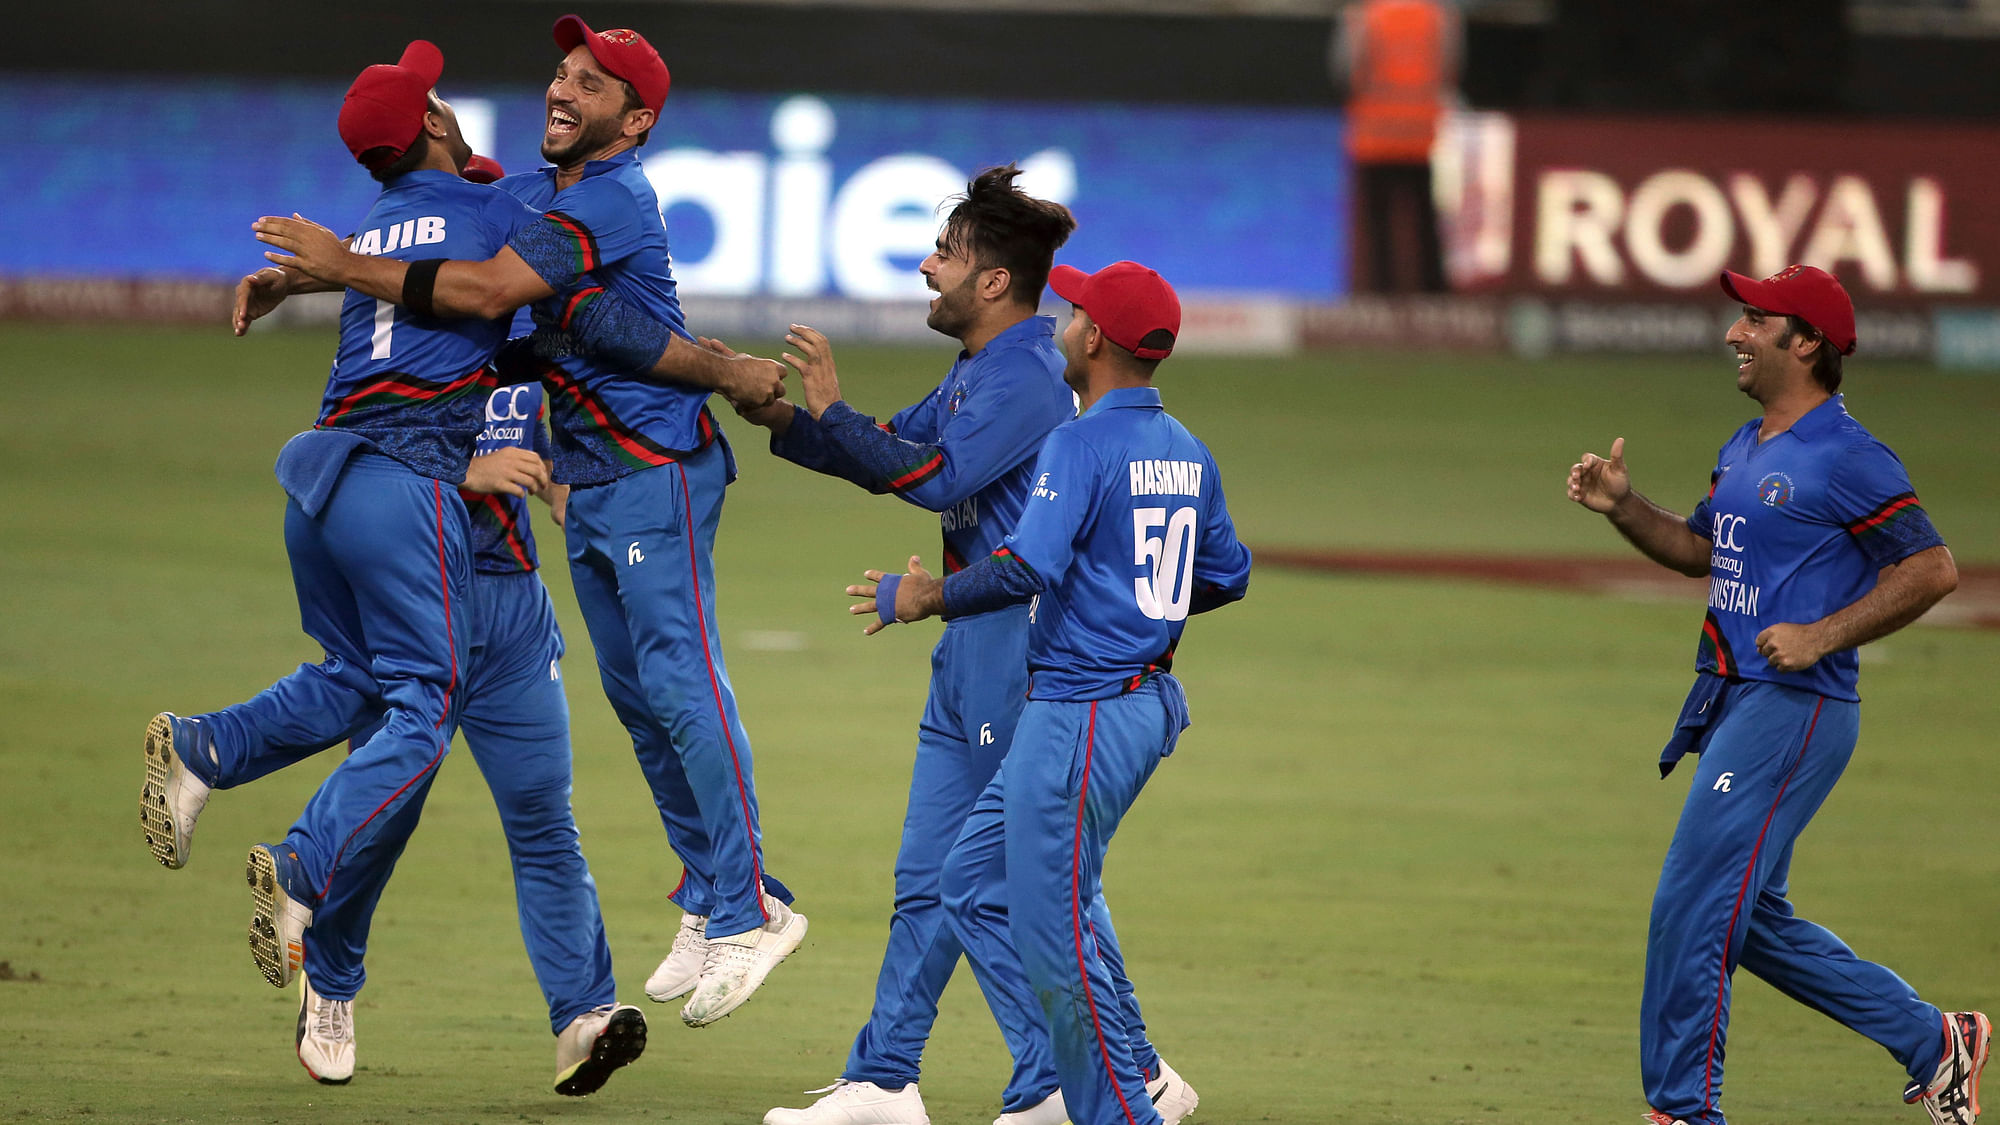 Afghanistan cricketers celebrate after drawing with India in their final Super Four match.